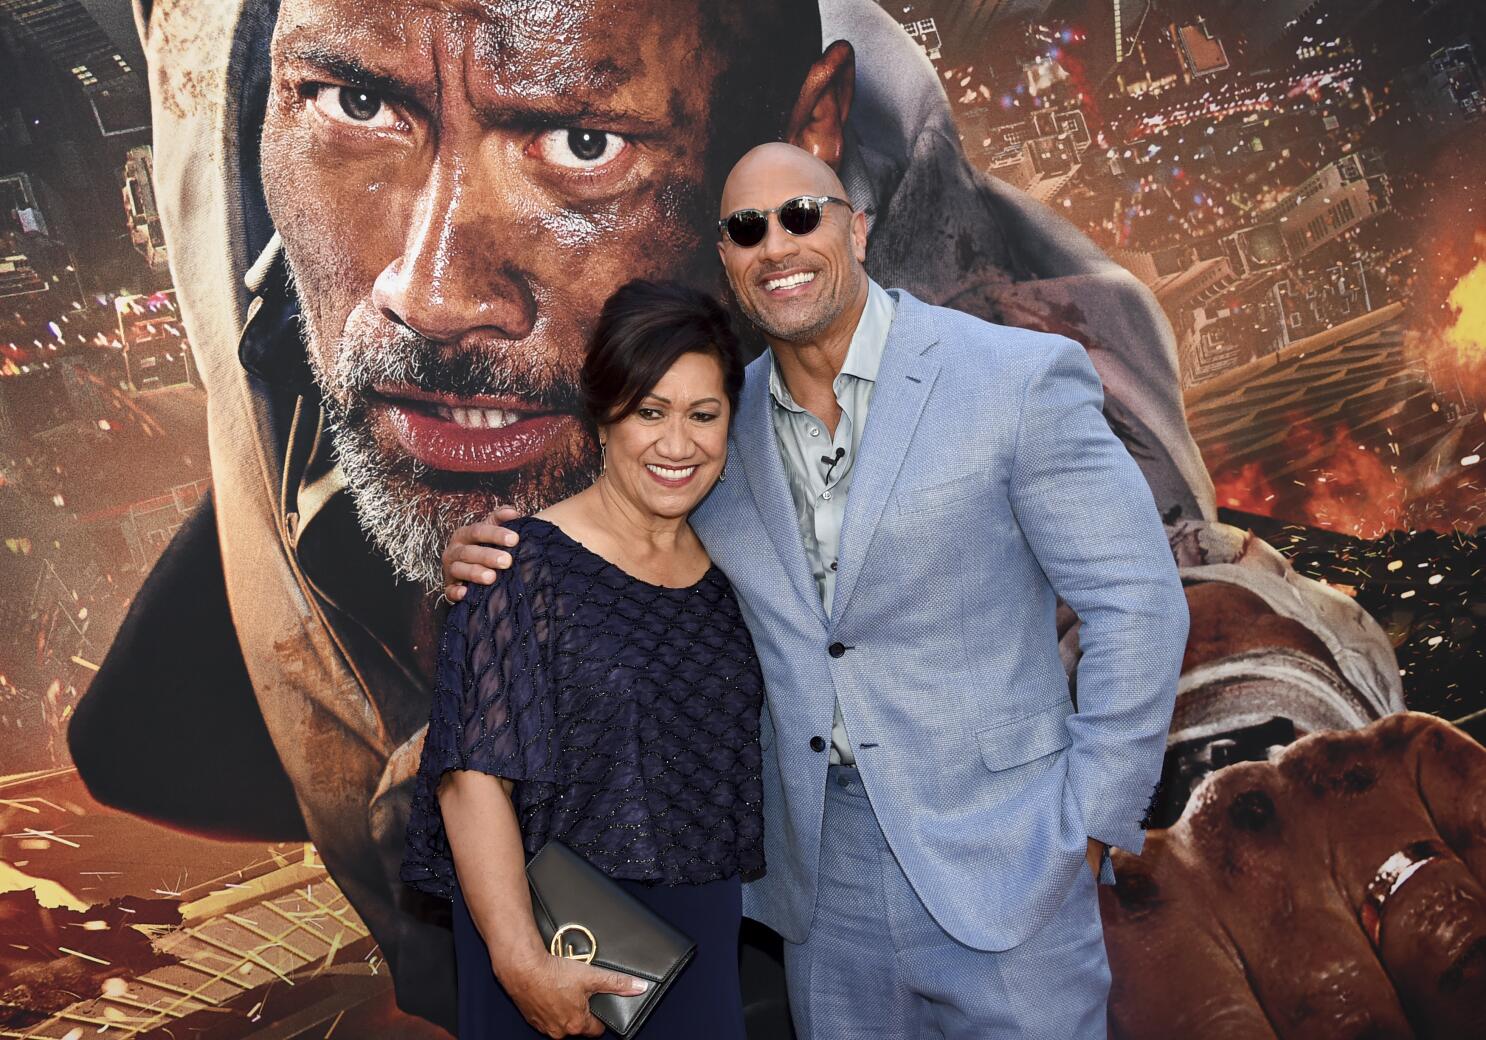 In moving tribute, Dwayne “The Rock” Johnson remembers his father's  'barrier breaking life' – The Morning Call